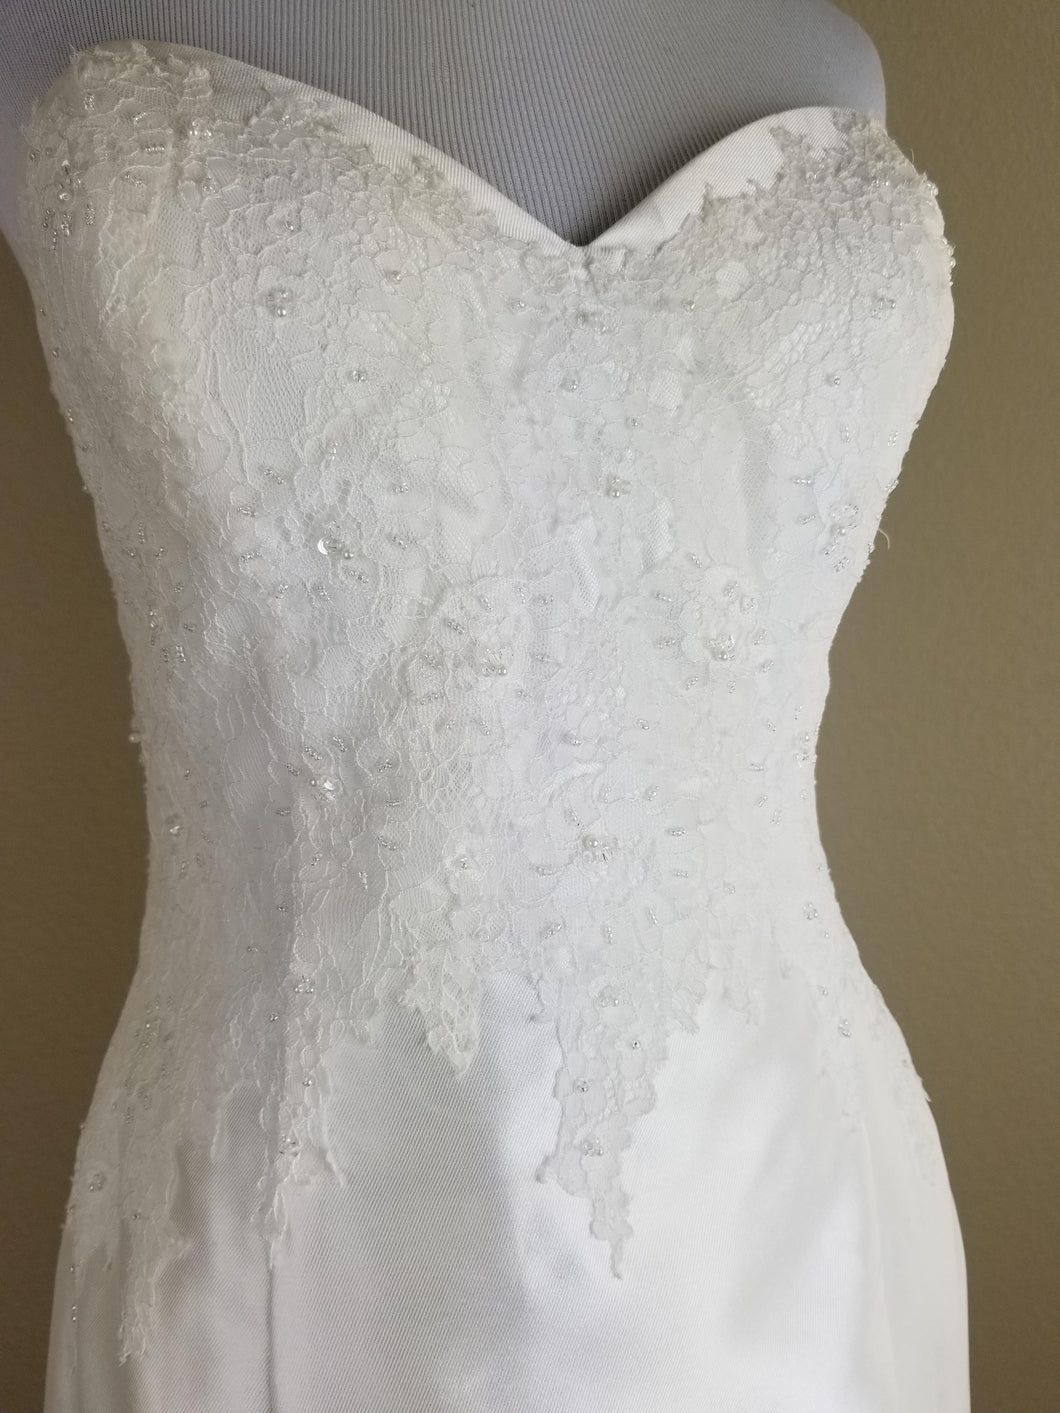 Alfred Angelo '400 Diamond White' size 10 new wedding dress front view on mannequin